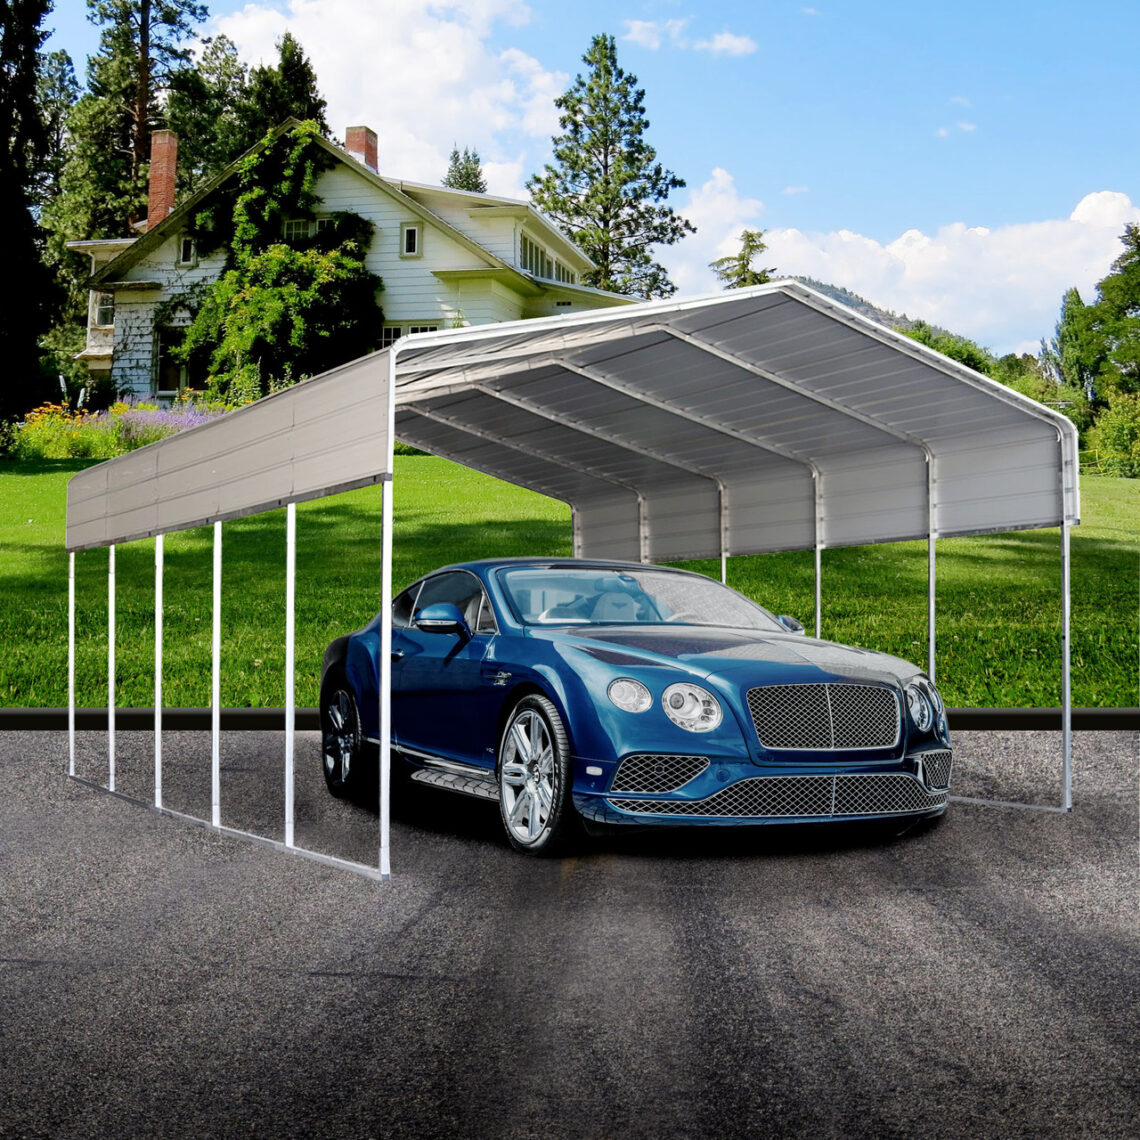 Do I Need a Permit for a Freestanding Carport? Explained